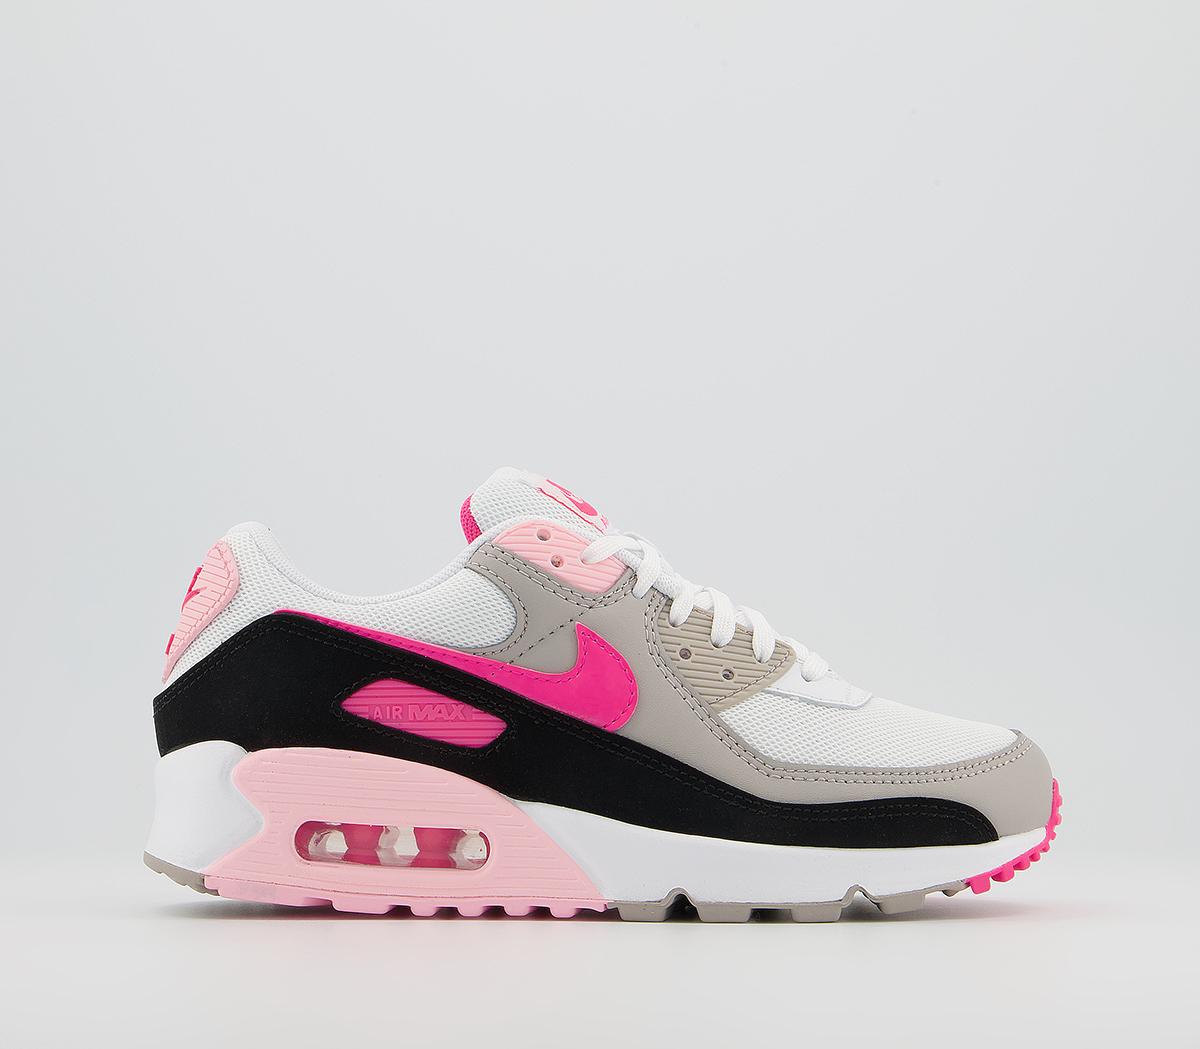 Nike Air Max 90 Trainers White Hyper Pink Black Grey - Women's Trainers